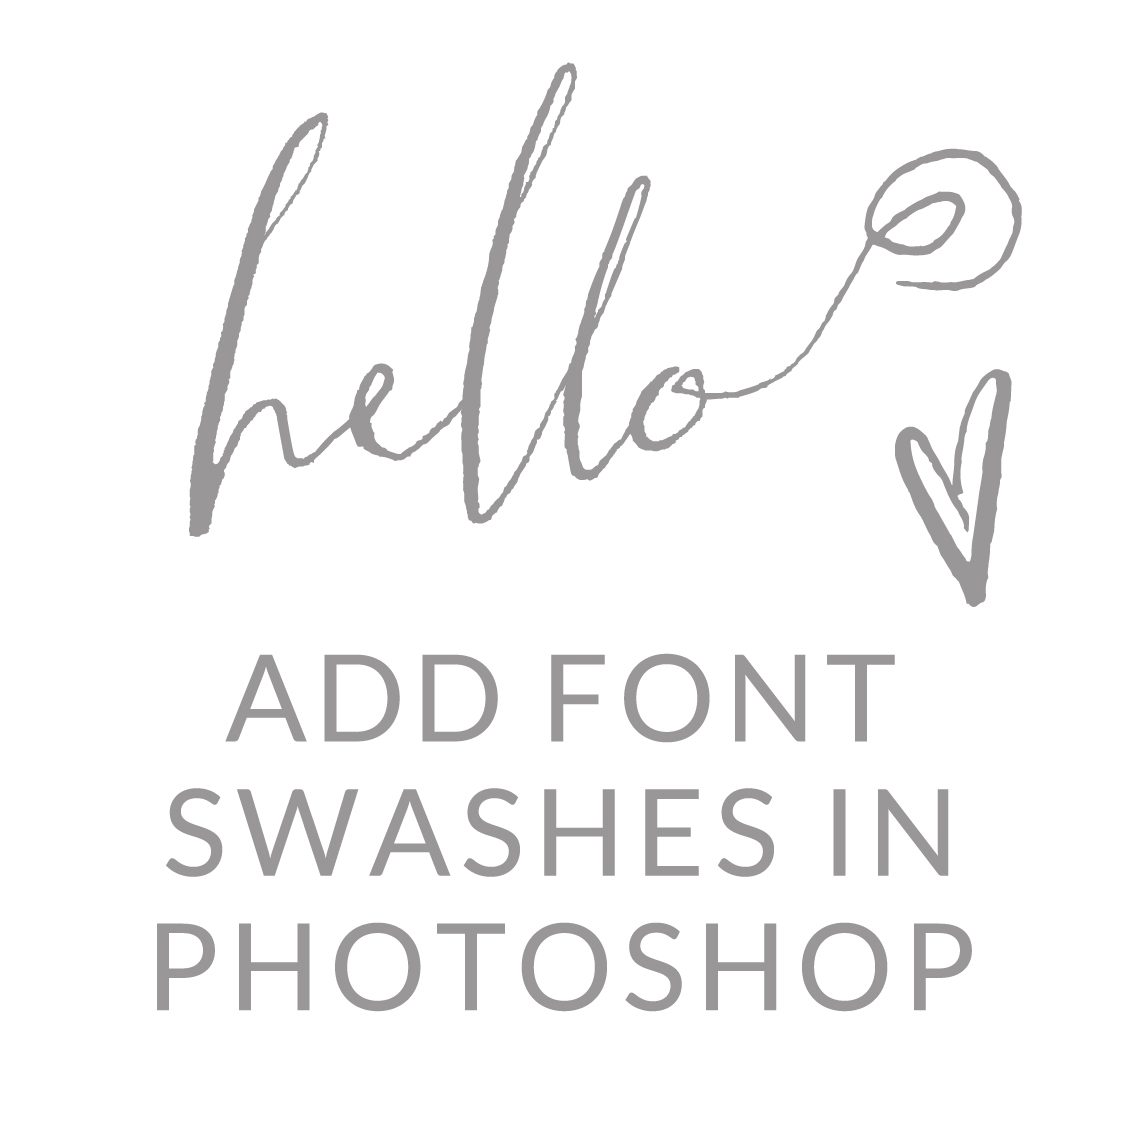 Fonts in Photoshop to Add Swashes